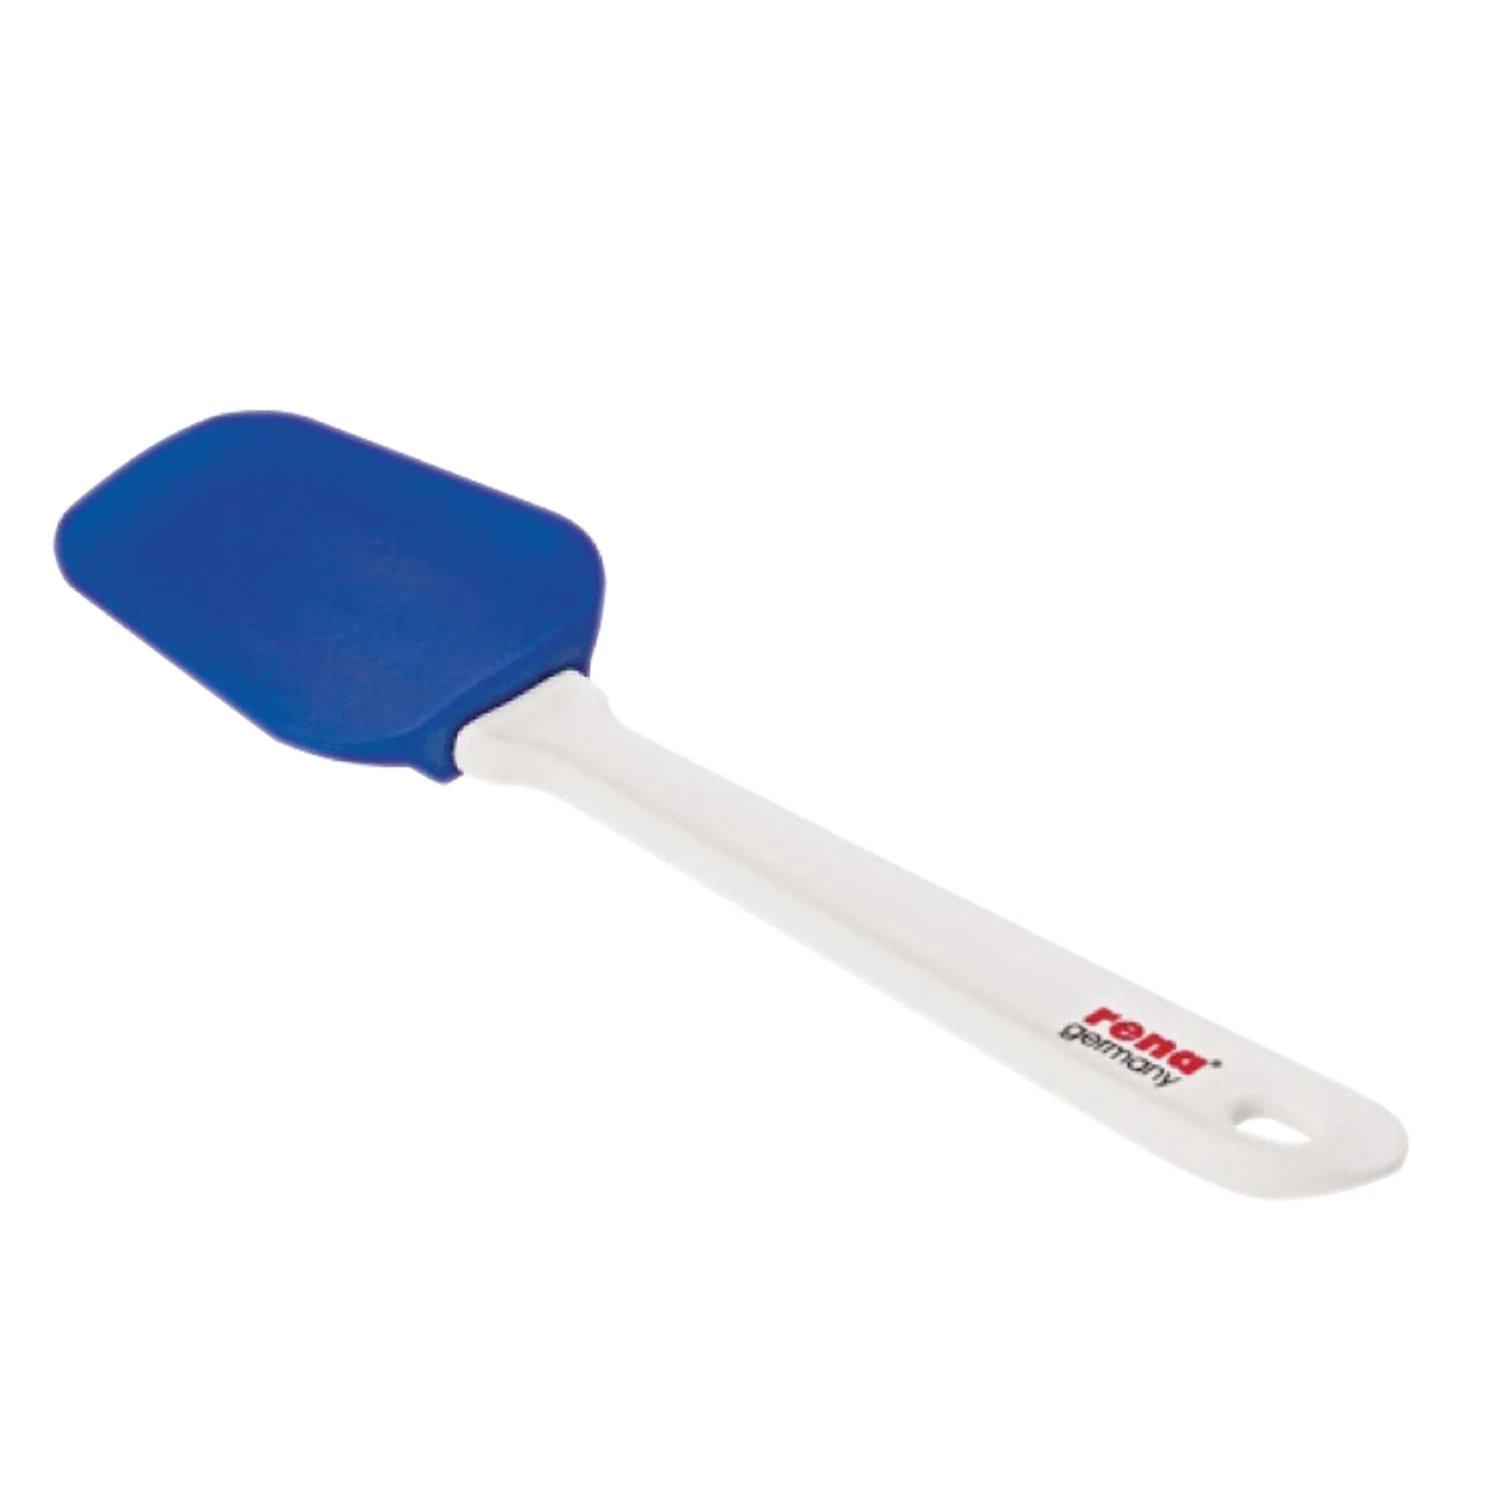 WELCOME RENA SILICON CUPPED SPATULA 30401